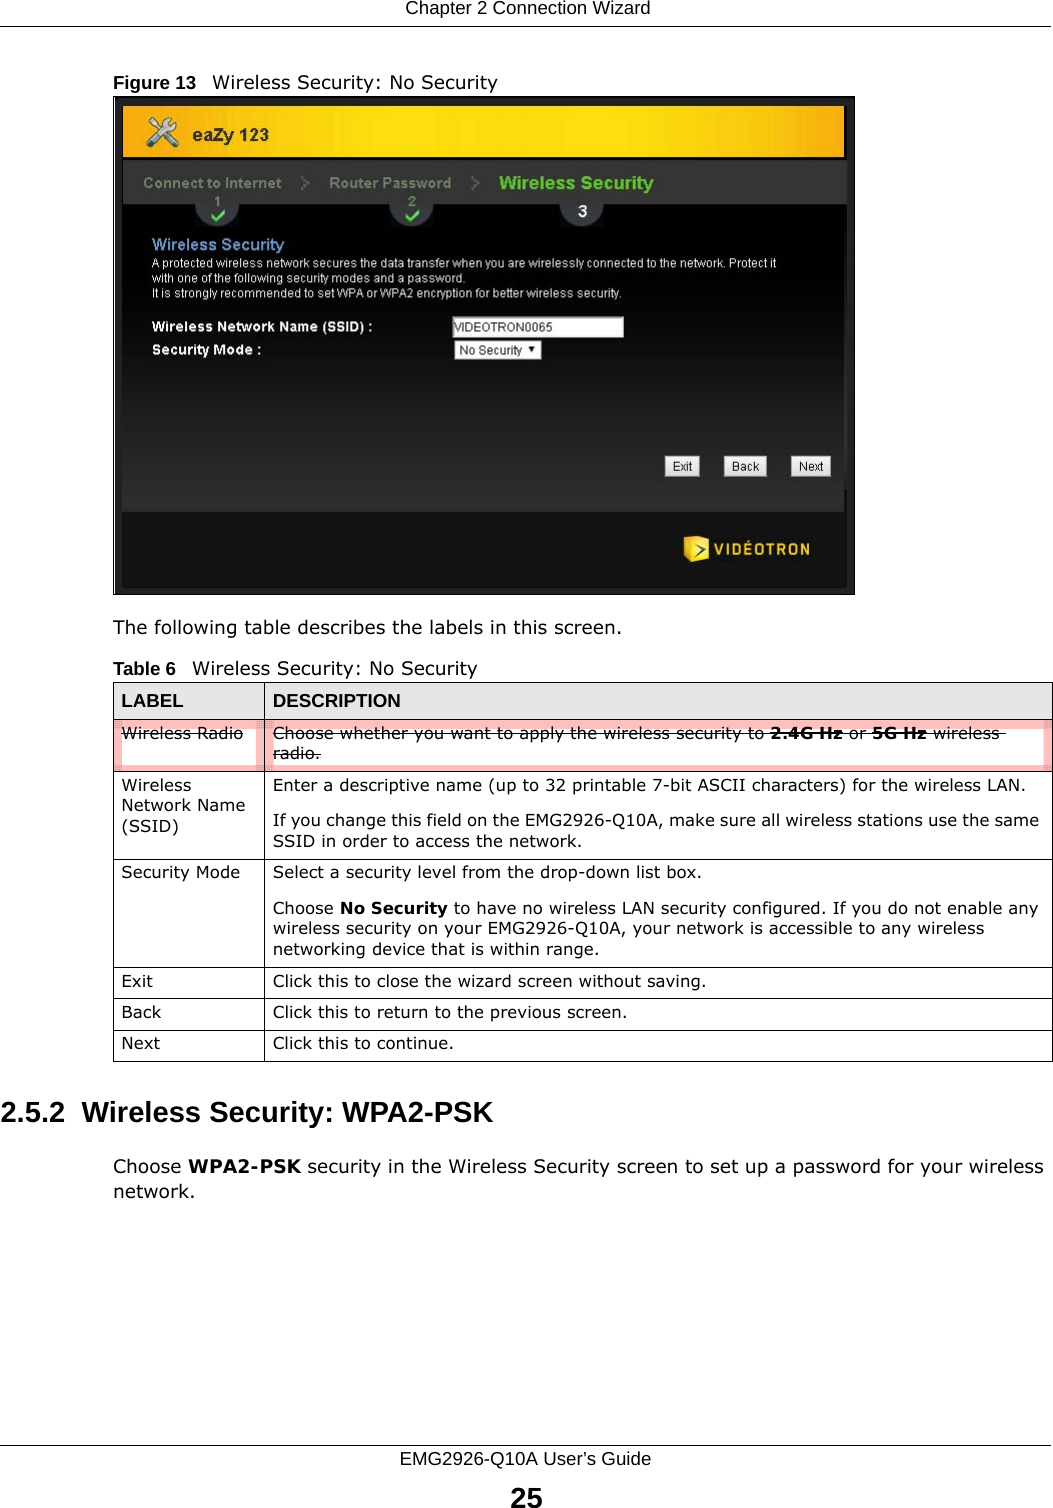  Chapter 2 Connection WizardEMG2926-Q10A User’s Guide25Figure 13   Wireless Security: No Security The following table describes the labels in this screen.2.5.2  Wireless Security: WPA2-PSKChoose WPA2-PSK security in the Wireless Security screen to set up a password for your wireless network.Table 6   Wireless Security: No SecurityLABEL DESCRIPTIONWireless Radio Choose whether you want to apply the wireless security to 2.4G Hz or 5G Hz wireless radio.Wireless Network Name (SSID)Enter a descriptive name (up to 32 printable 7-bit ASCII characters) for the wireless LAN. If you change this field on the EMG2926-Q10A, make sure all wireless stations use the same SSID in order to access the network. Security Mode Select a security level from the drop-down list box. Choose No Security to have no wireless LAN security configured. If you do not enable any wireless security on your EMG2926-Q10A, your network is accessible to any wireless networking device that is within range. Exit Click this to close the wizard screen without saving.Back Click this to return to the previous screen.Next Click this to continue. 